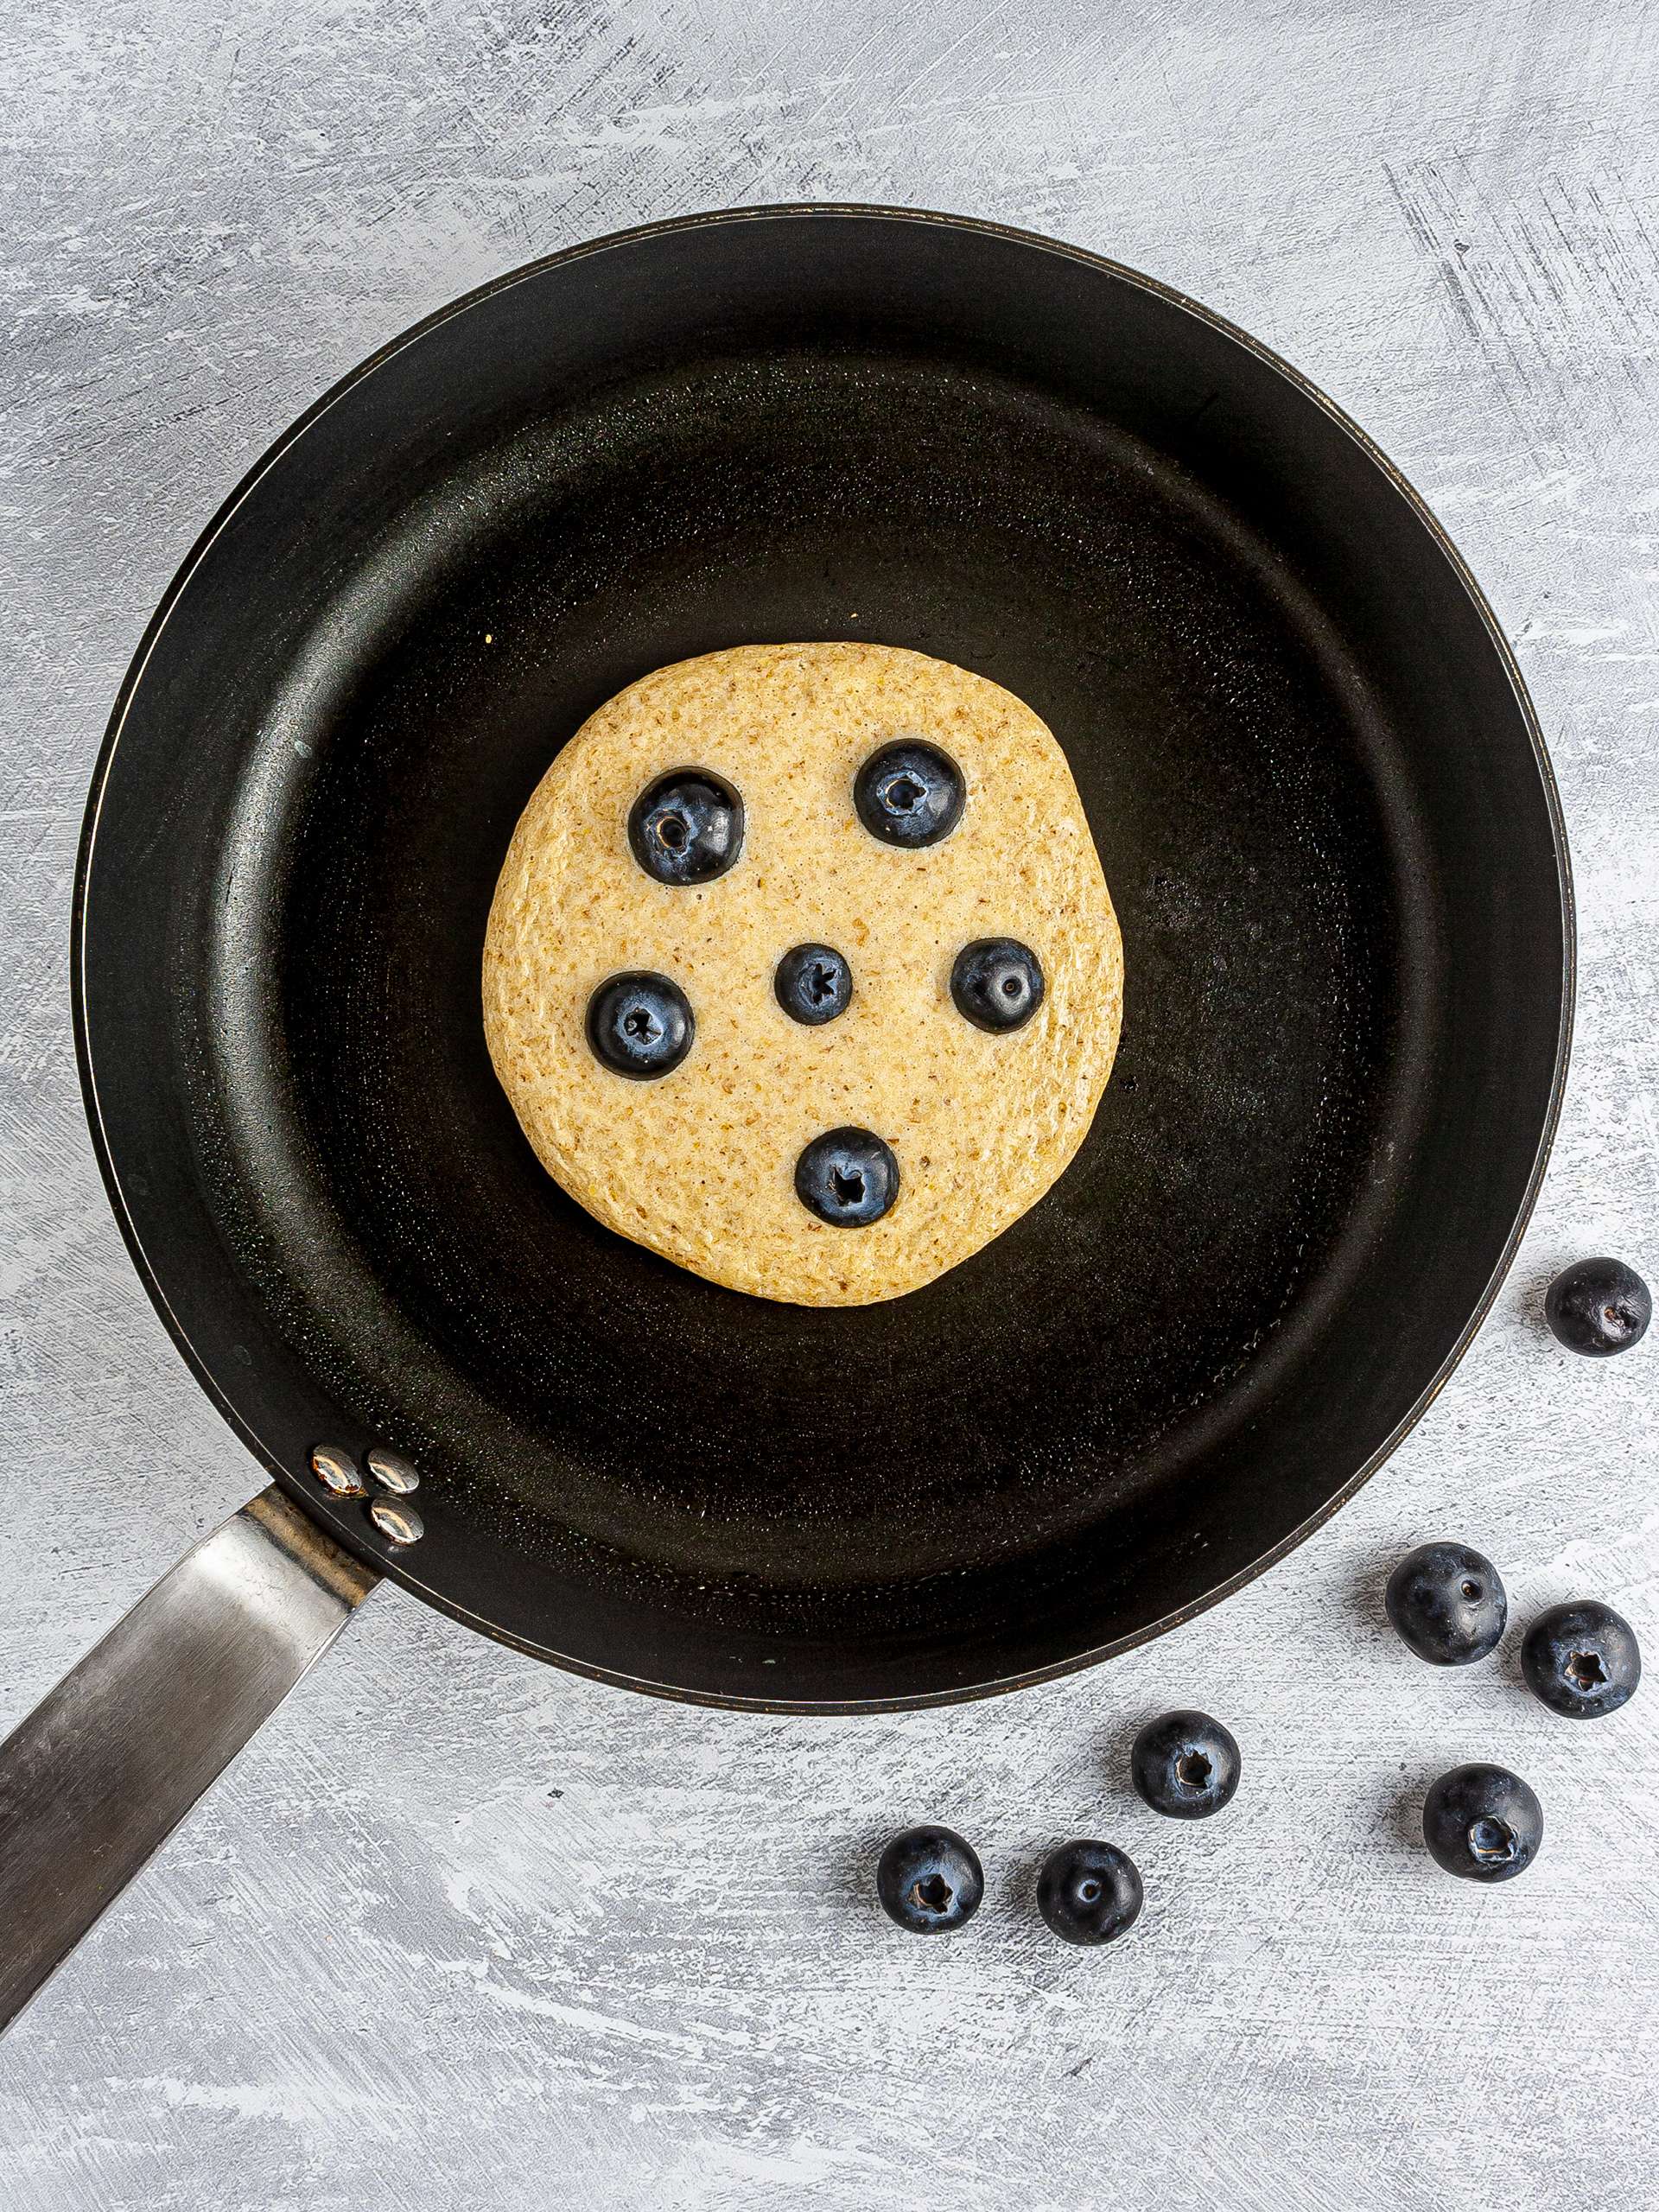 Pancake with blueberries cooking in a pan